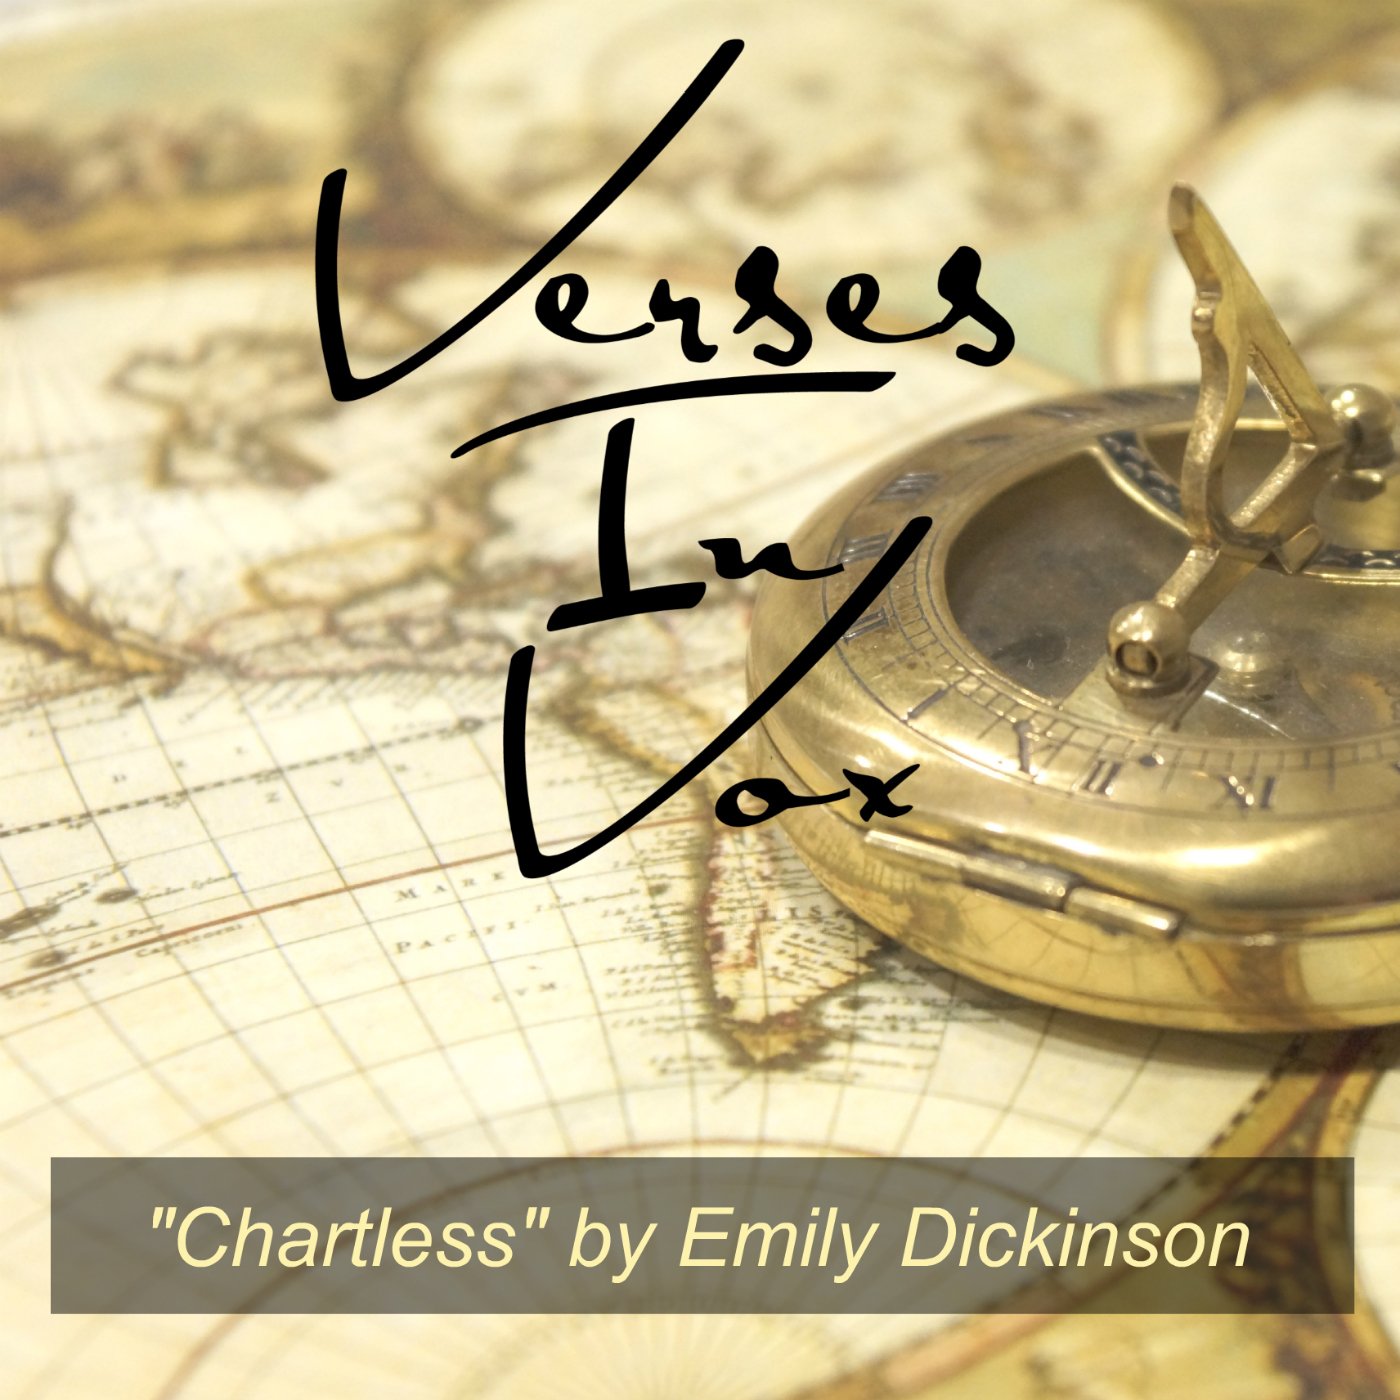 Art for "Chartless" by Emily Dickinson by Porchlight Family Media